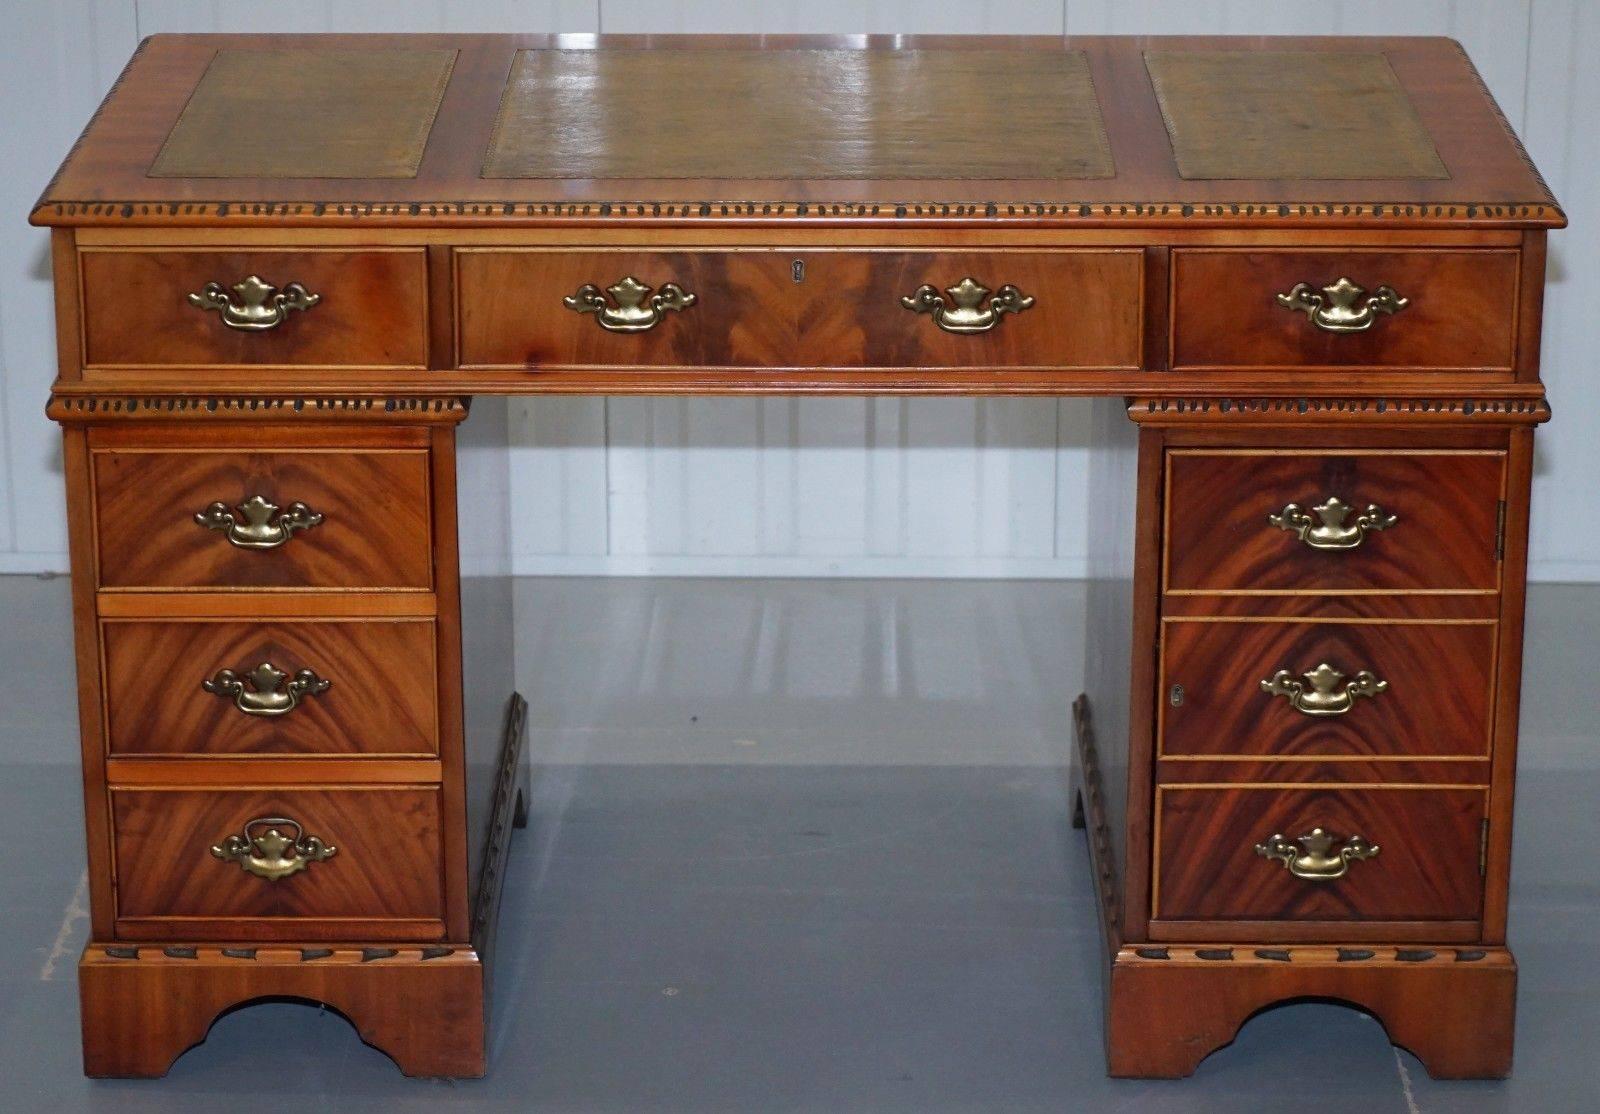 We are delighted to offer for auction this stunning vintage twin pedestal partner desk finished in luxury walnut and with a green leather tooled edge surface

A very good looking and well-made desk with a lovely timber patina, its rare to find